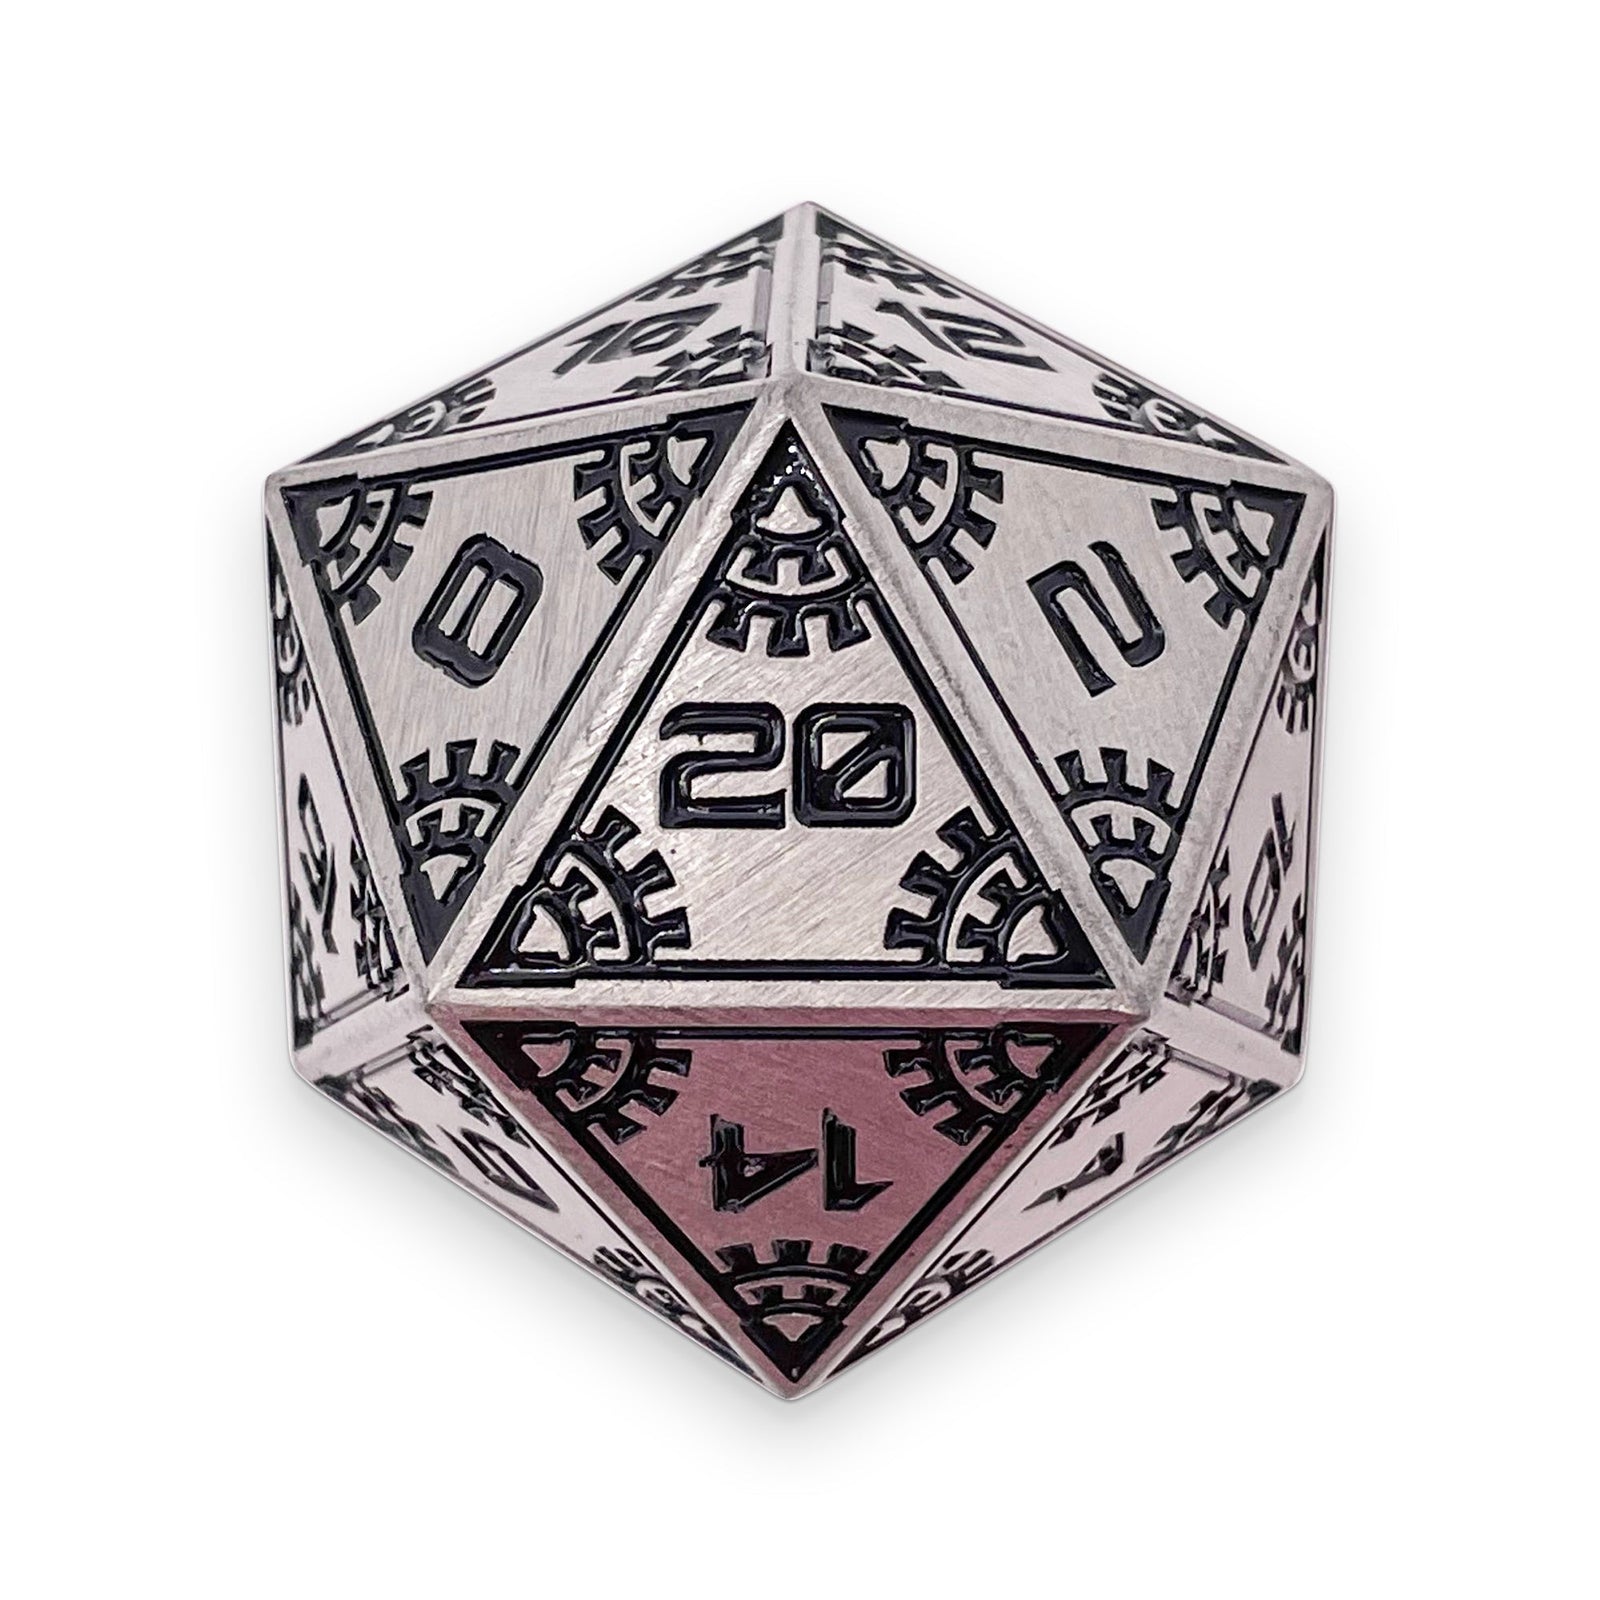 Shooting Star - Astroid Boulder® 45MM Alloy Dice - NOR 00860